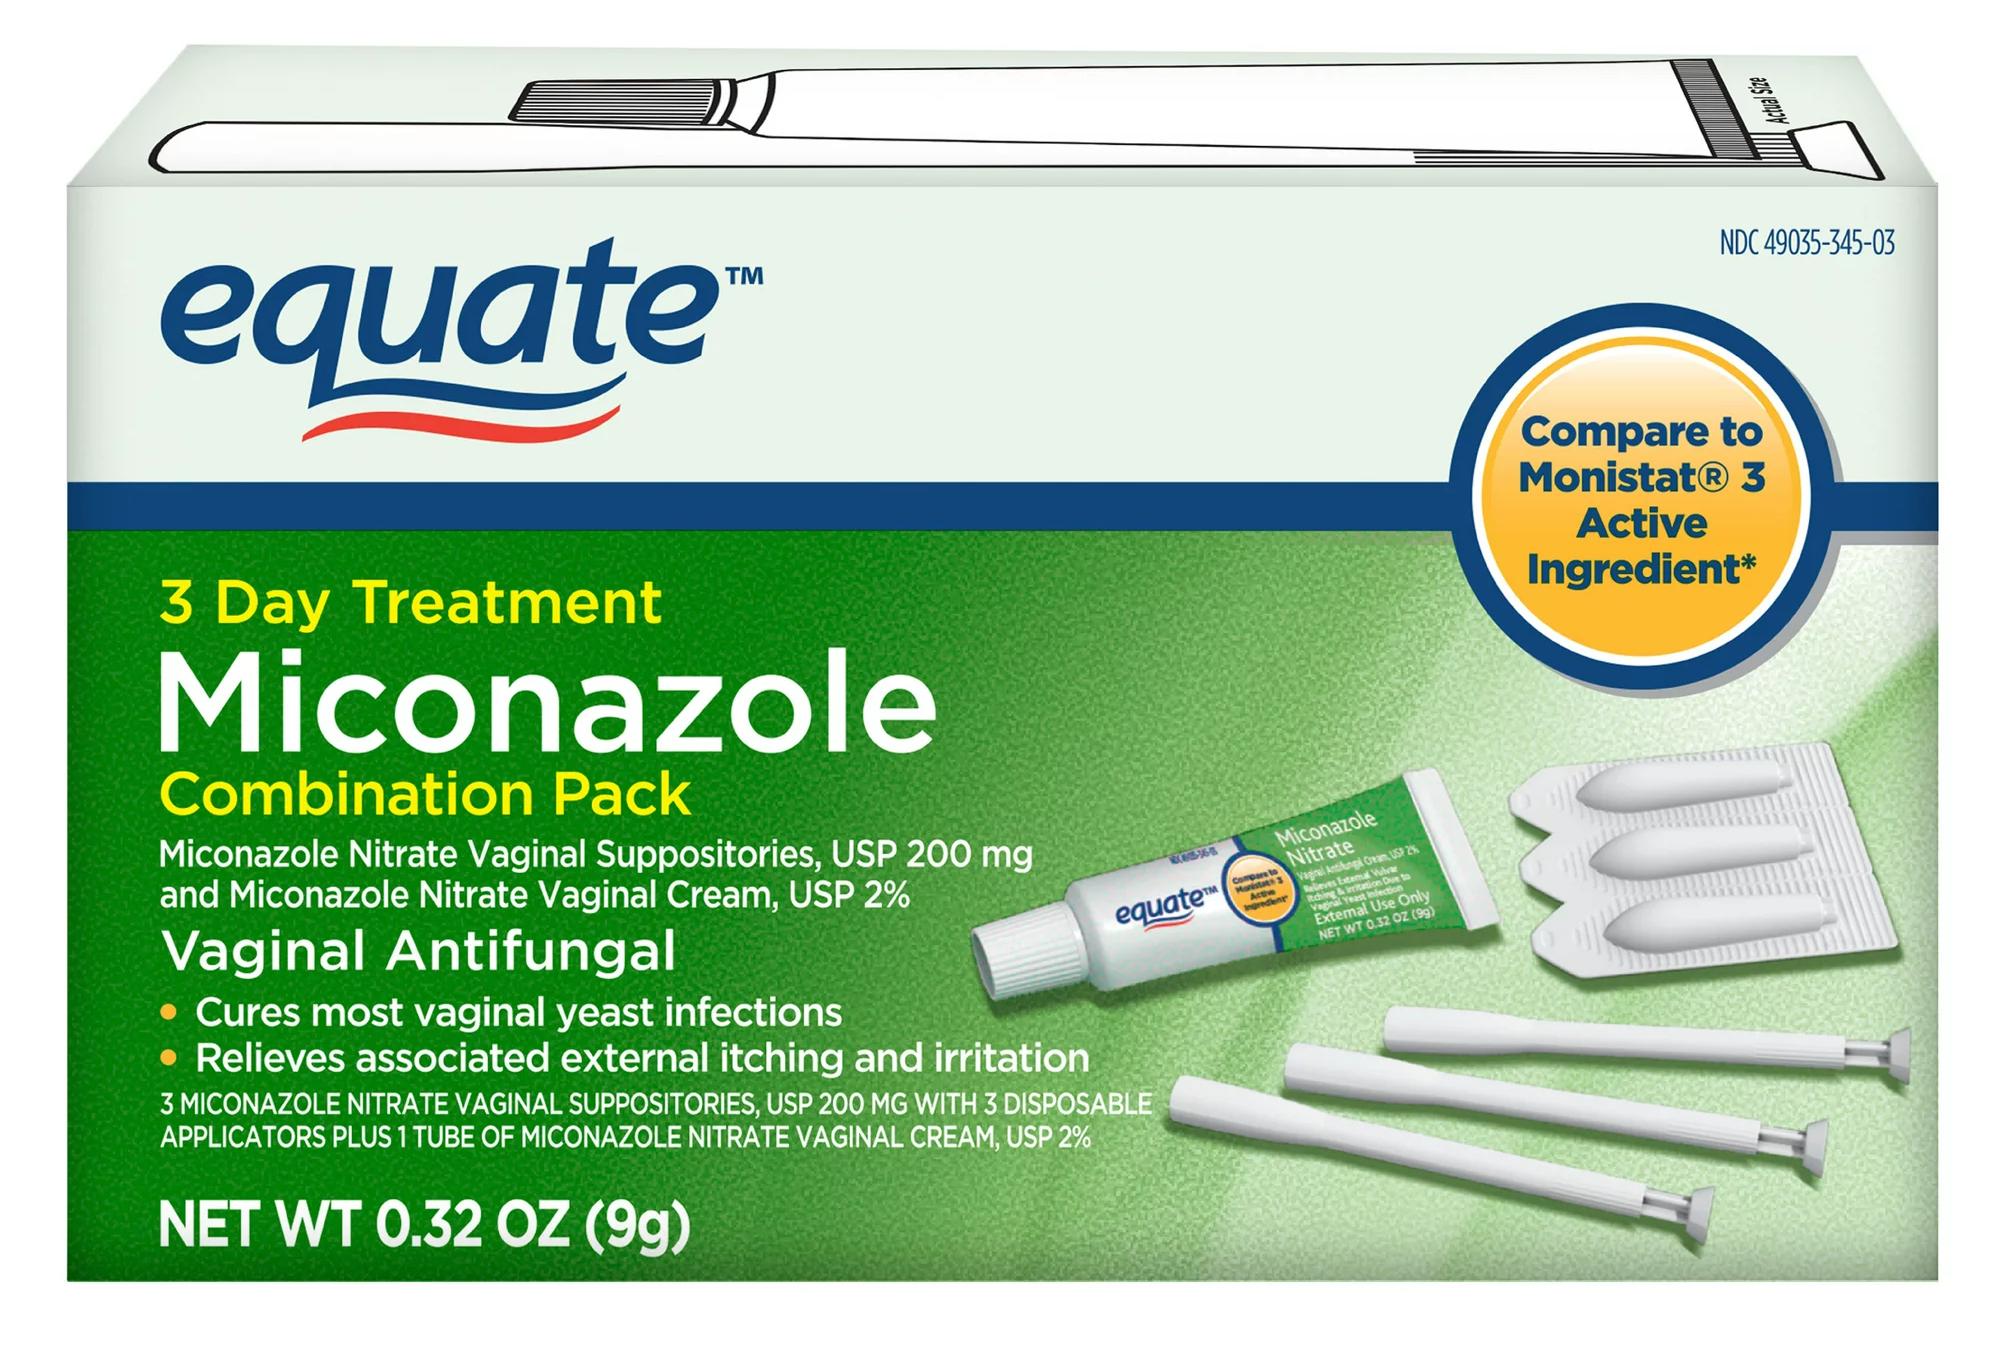 Equate - Miconazole 3 Day Treatment, Disposable Suppositories Plus Cream, 0.32 oz